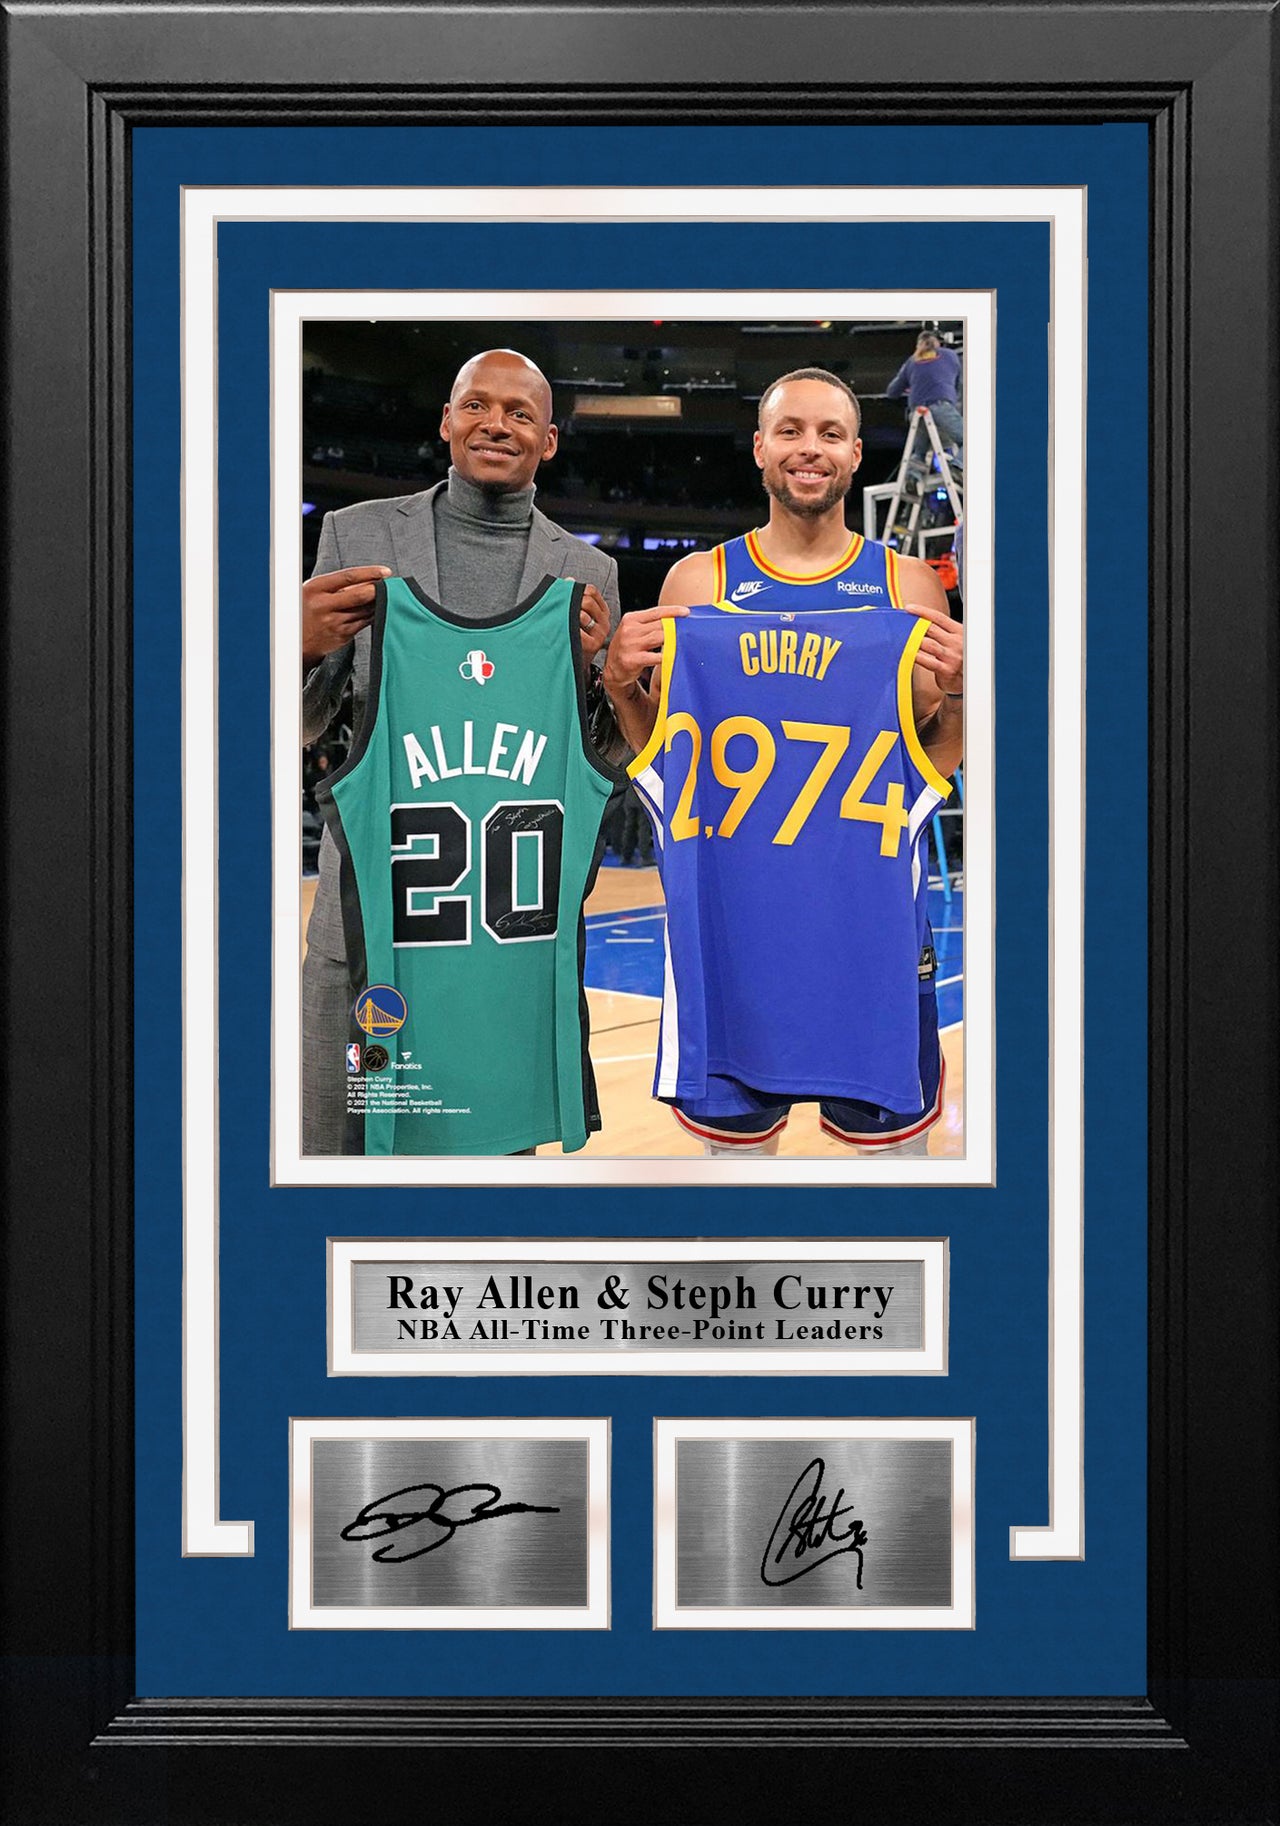 Ray Allen & Steph Curry 3-Point Record-Breaking Celebration 8" x 10" Framed Basketball Photo with Engraved Autographs - Dynasty Sports & Framing 